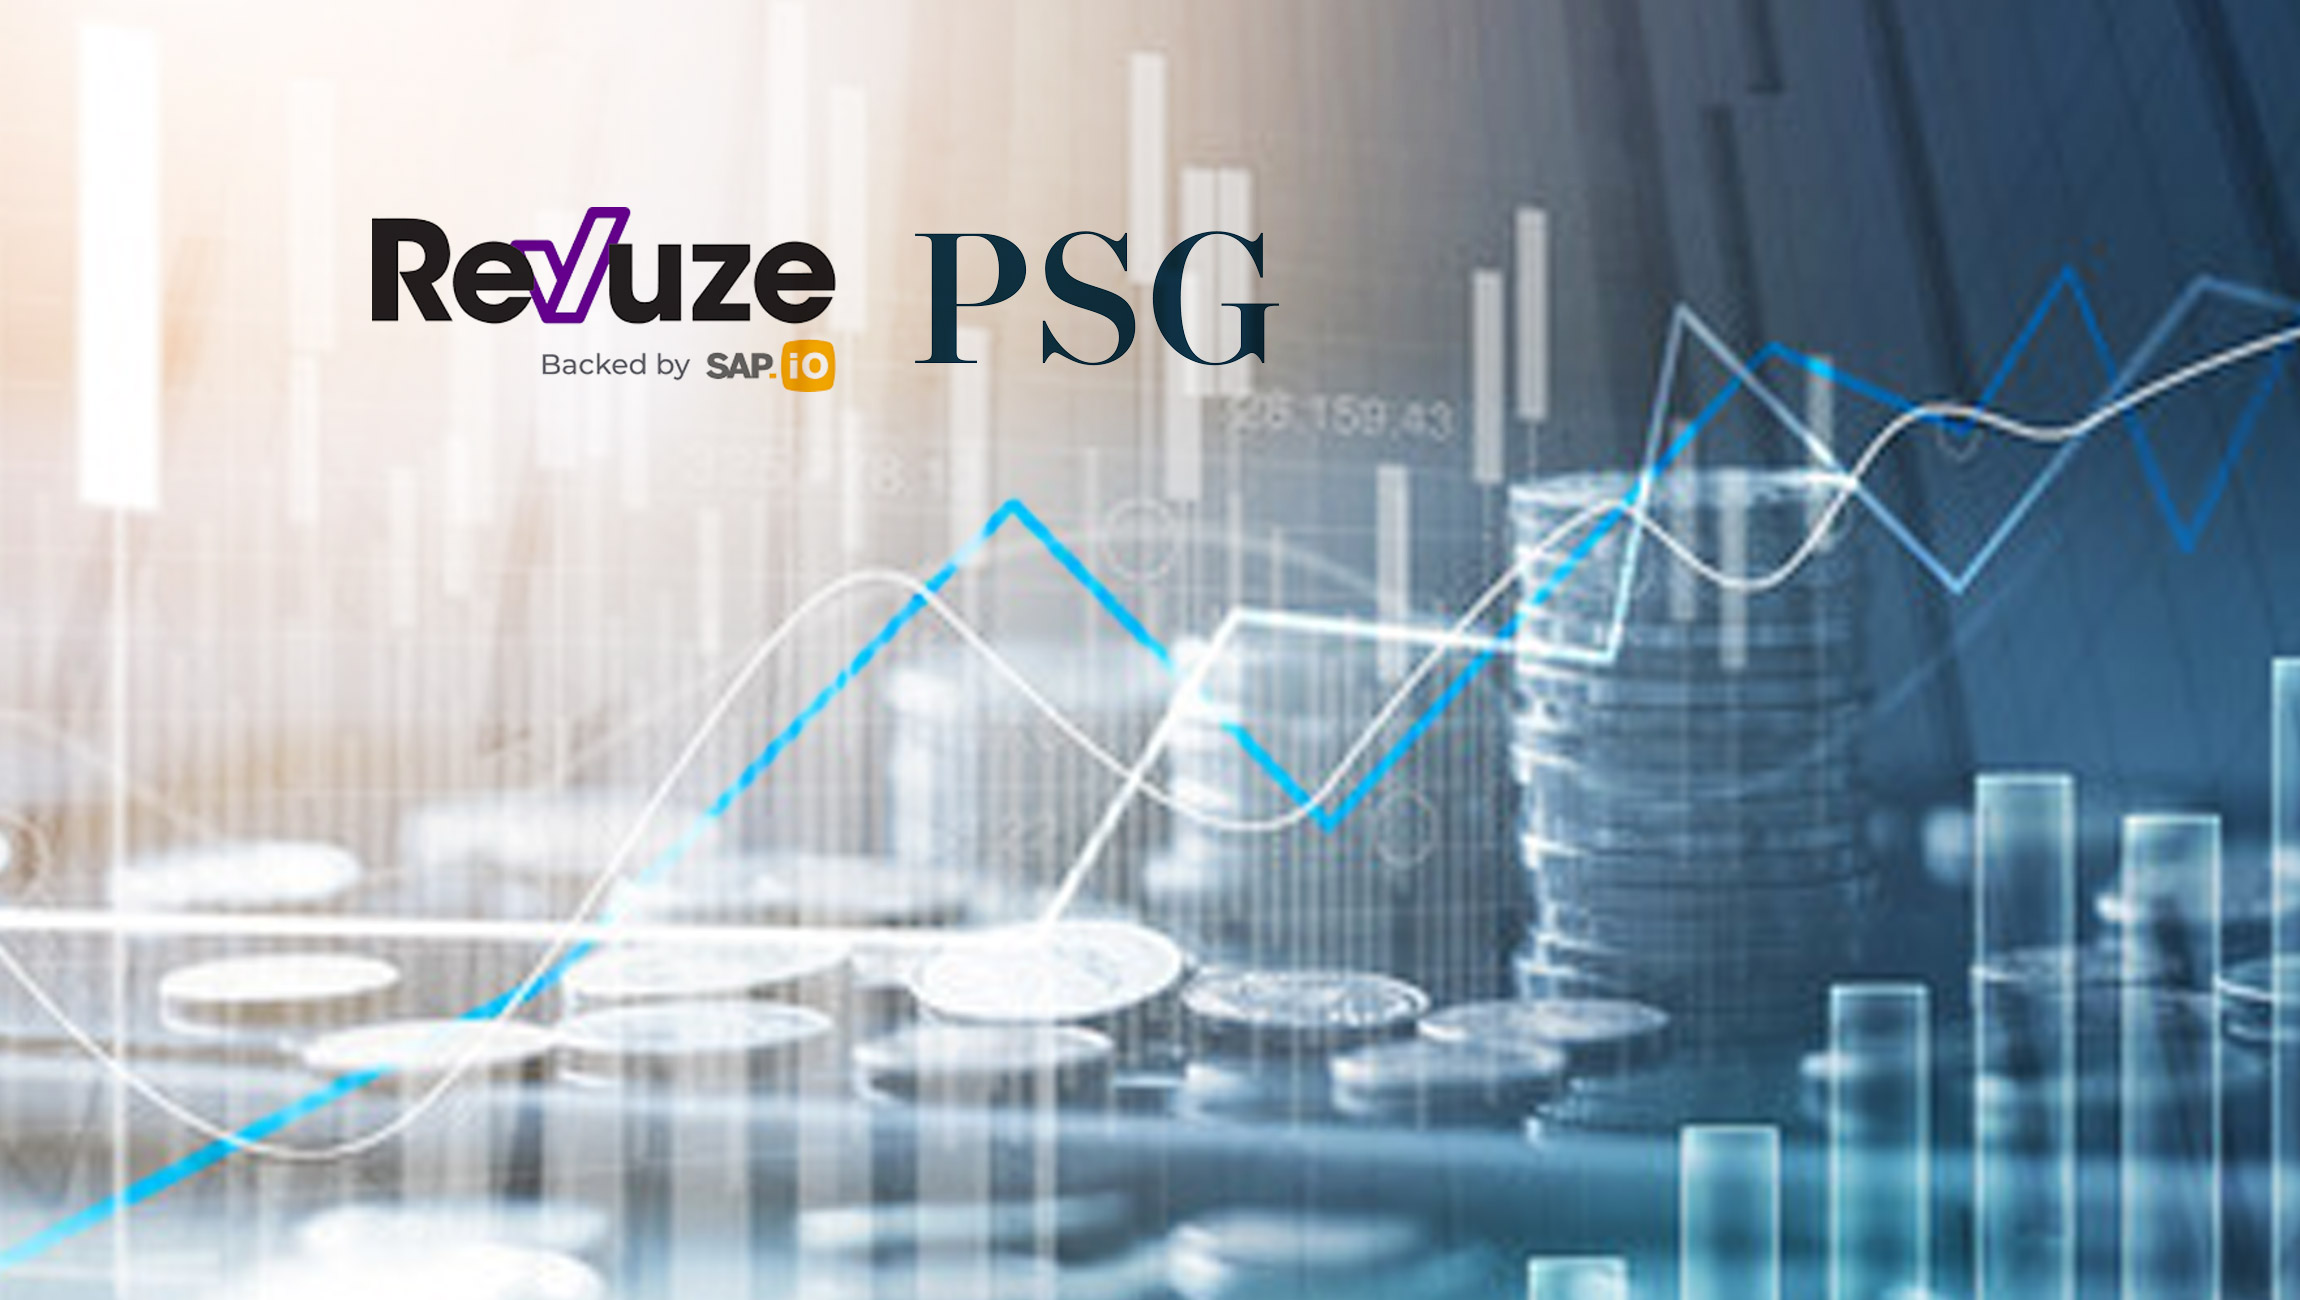 Revuze Announces $12 Million Growth Equity Investment Led by PSG 1